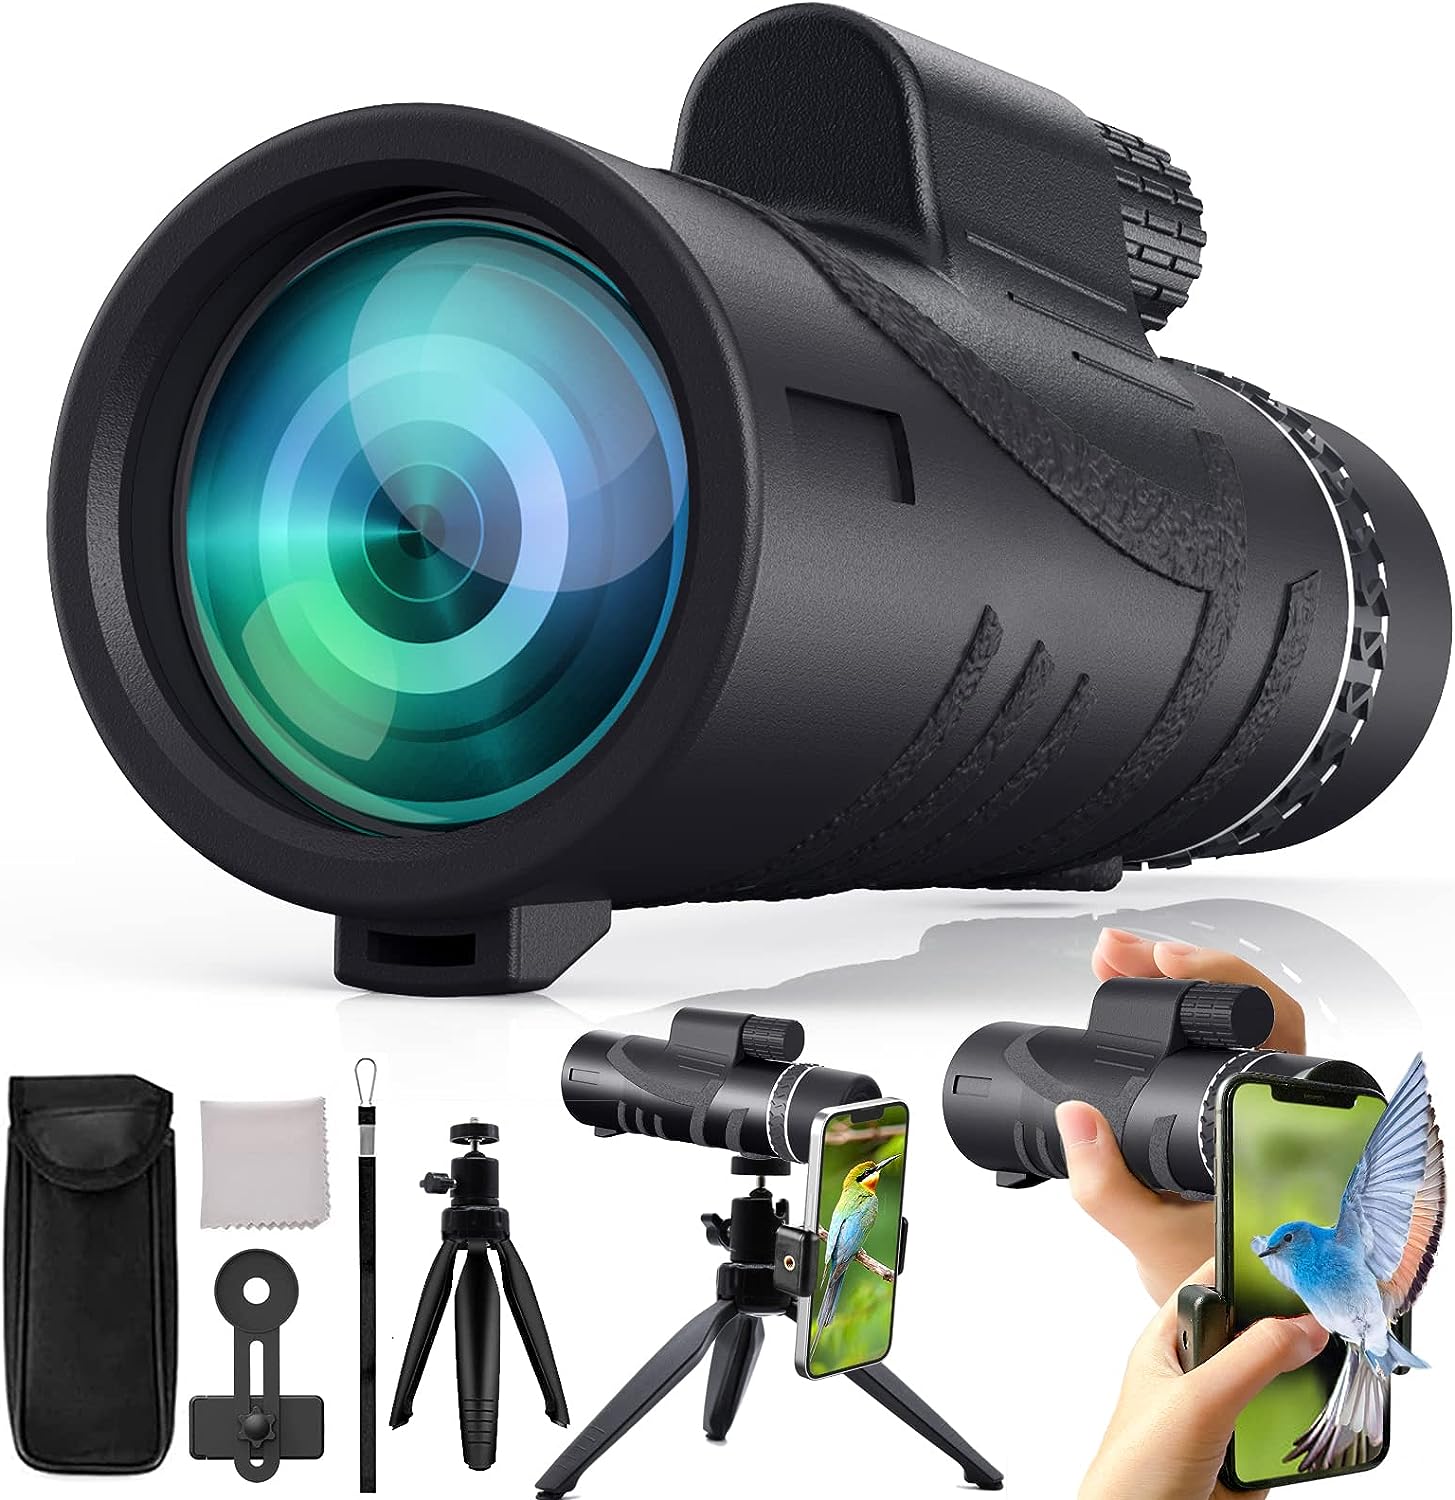 New 2023 80x100 HD Monoculars for Adults high Powered,Fyzpaea BAK-4 Prism and FMC Lens Monocular Telescope for Smartphone,Low Night Vision Monoculars for Bird Watching/Wildlife/Hunting/Hiking